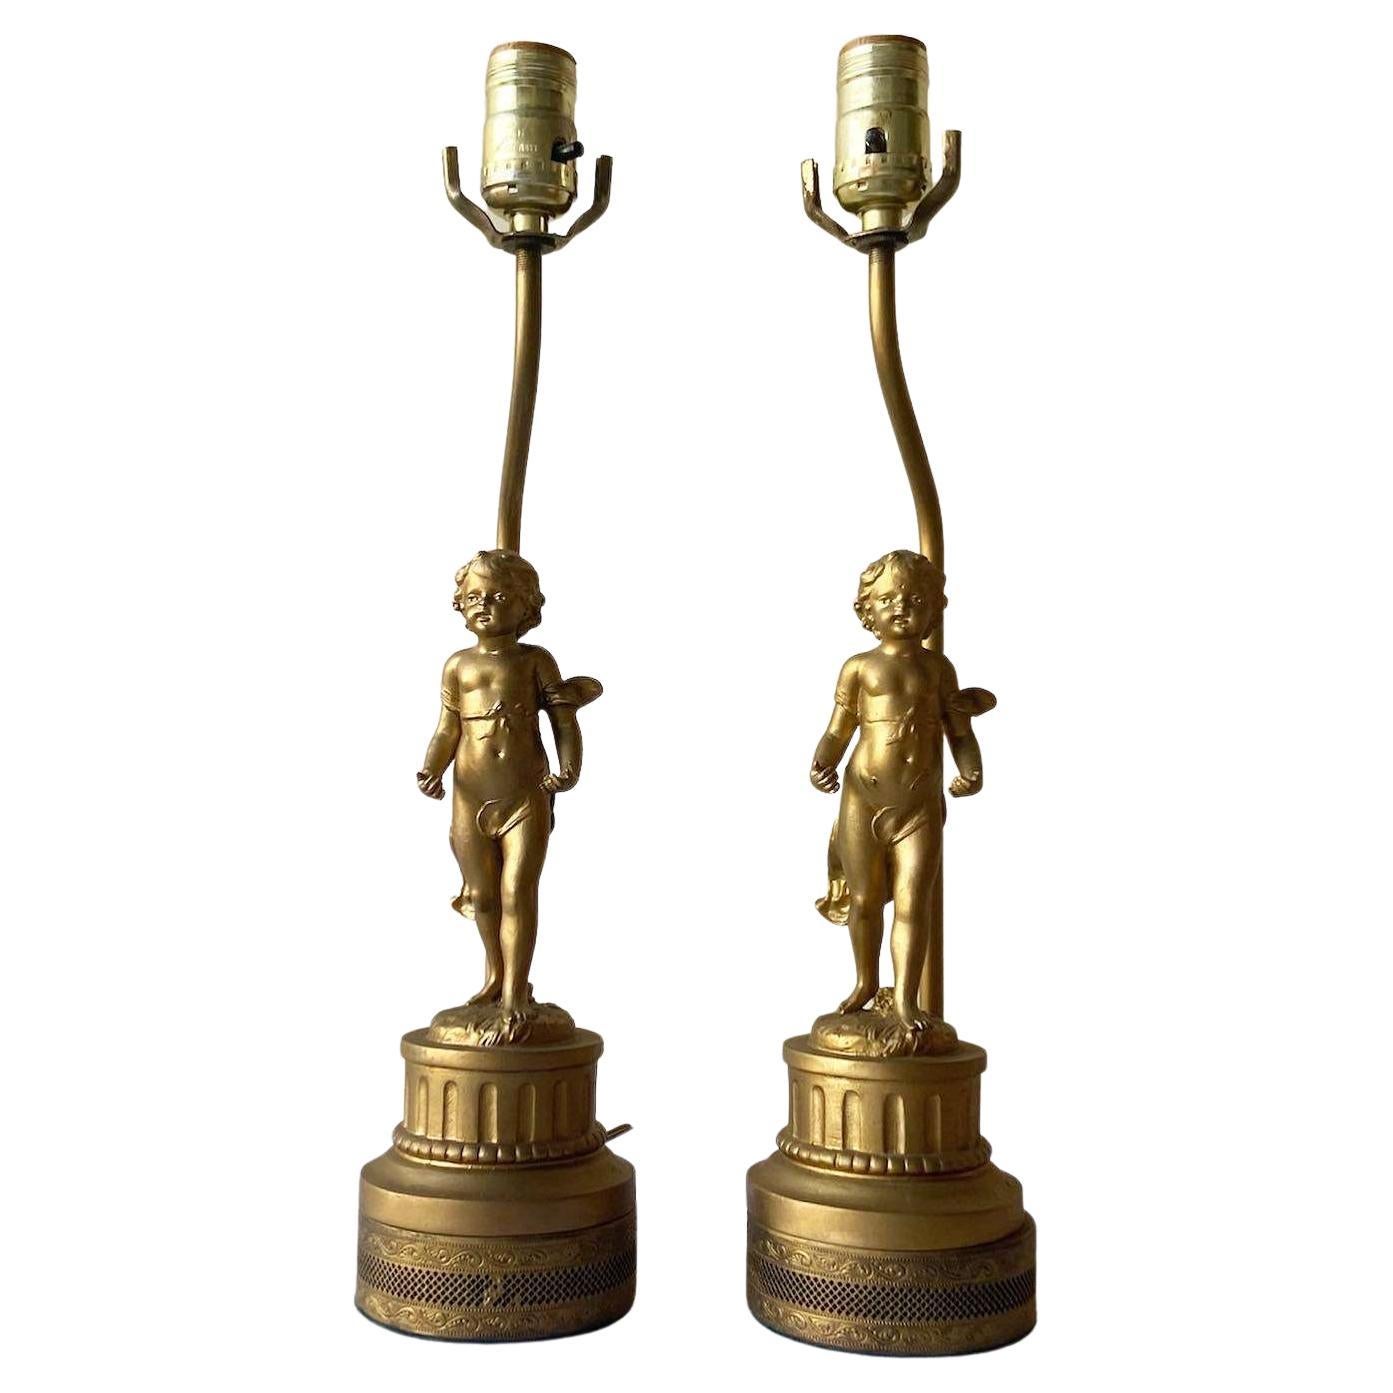 French Gilt Cherub Figural Torch Table Lamps - a Pair